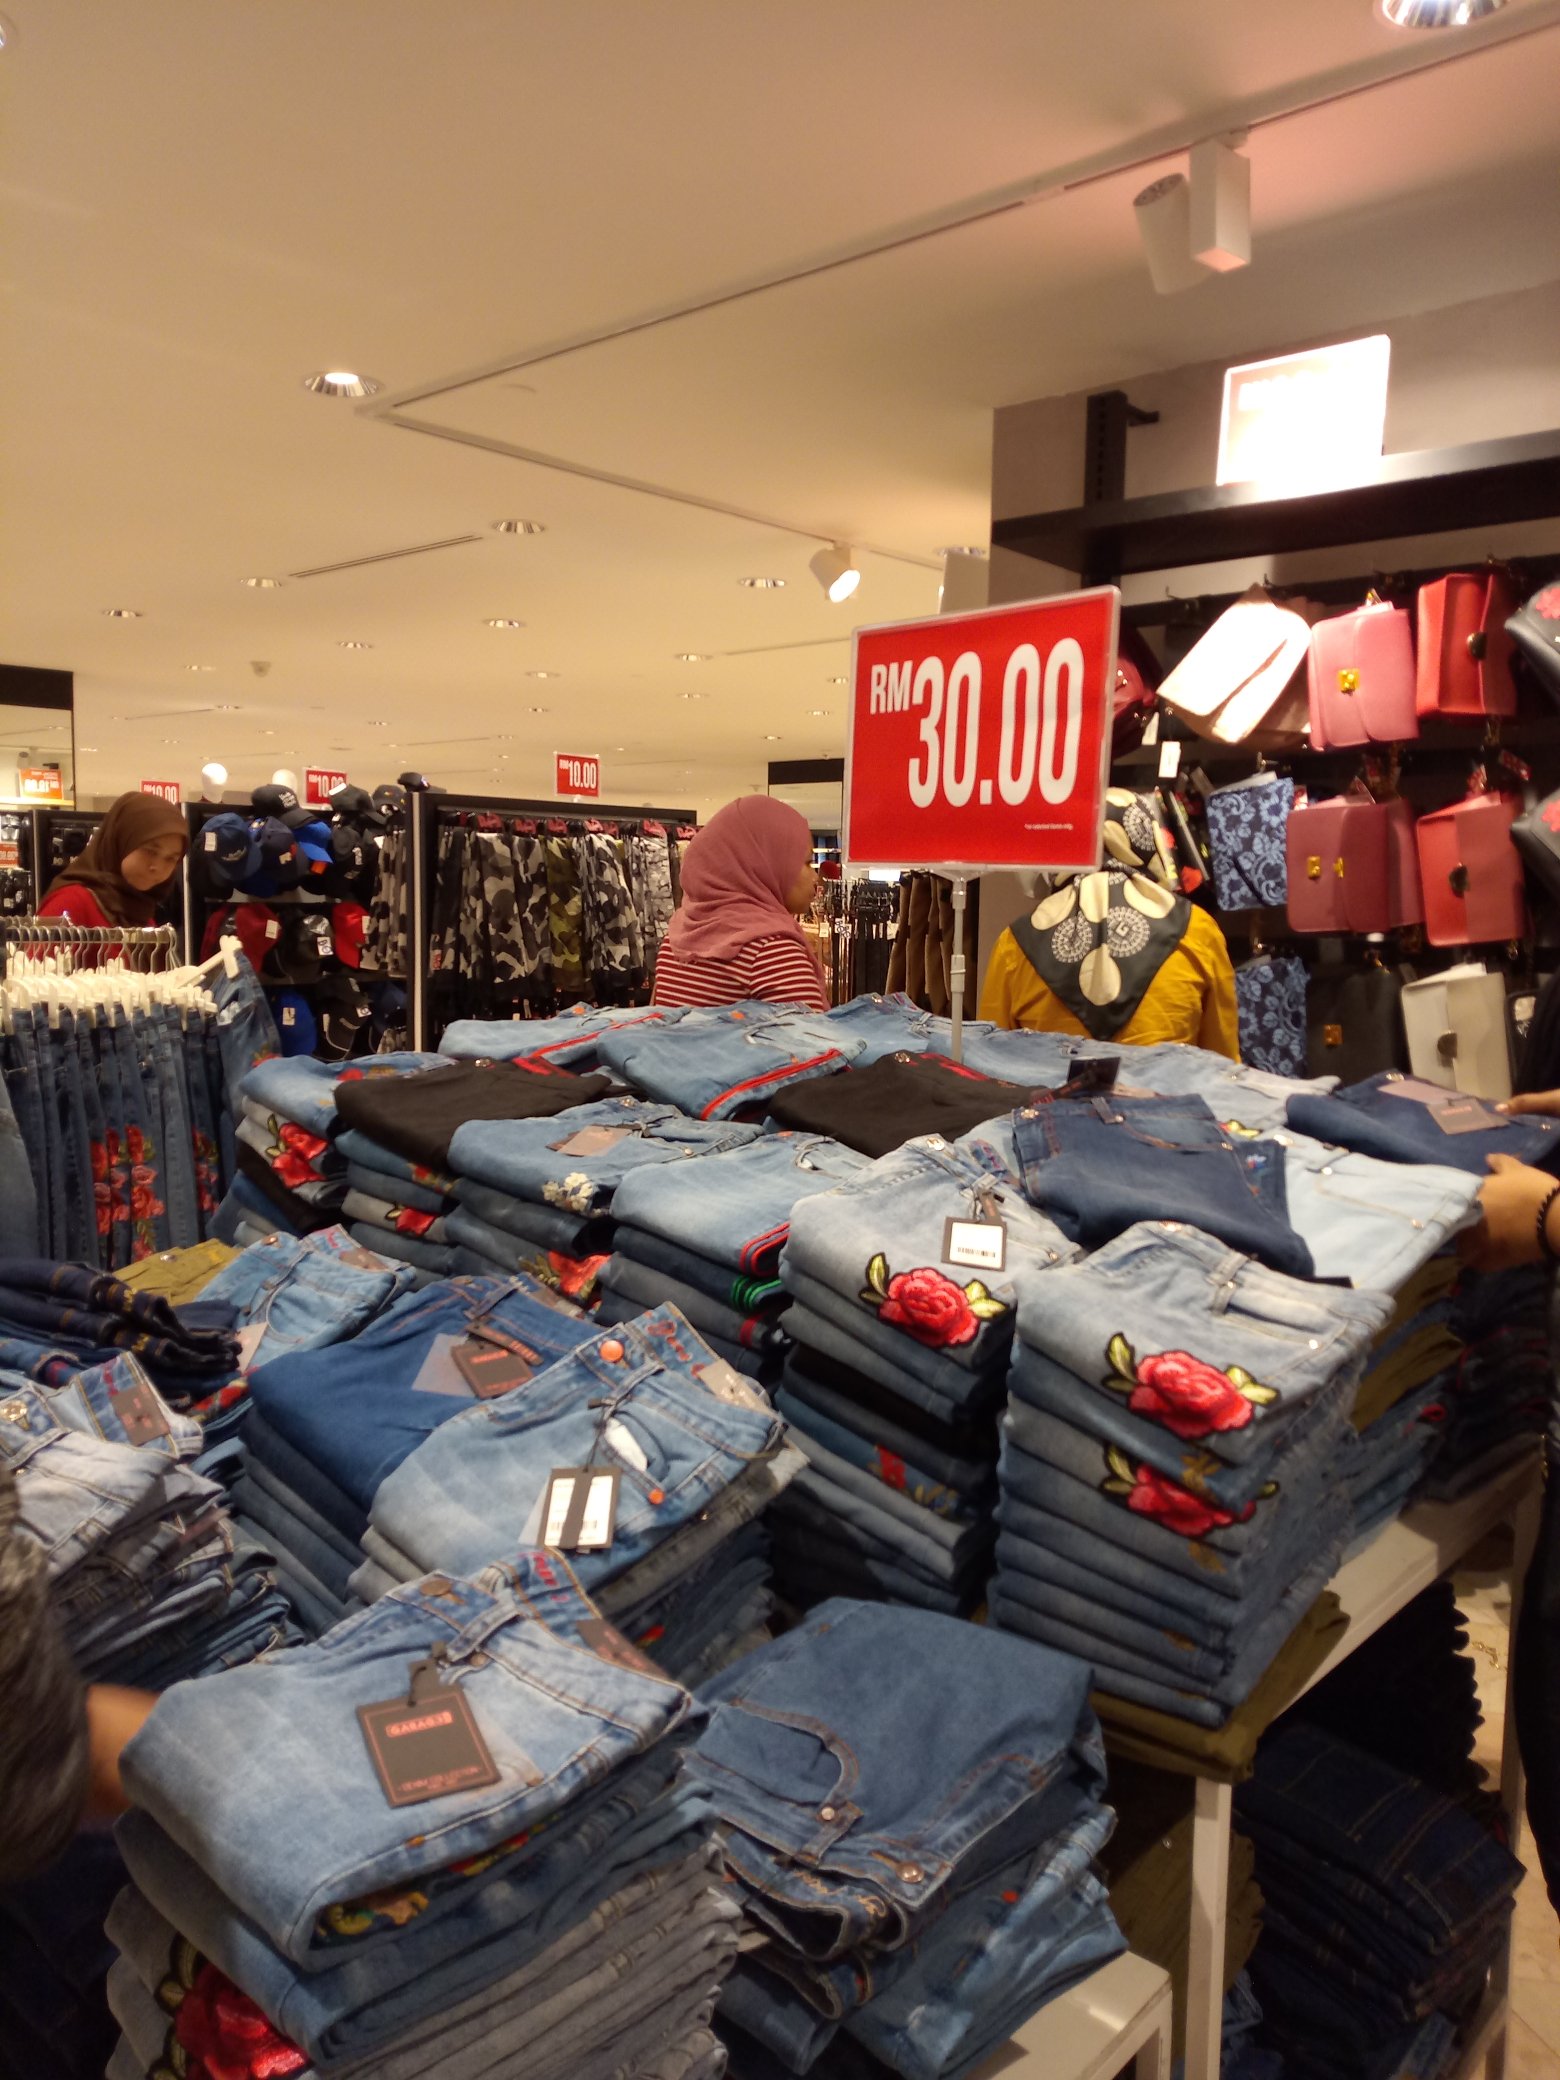 Brand outlet ampang point